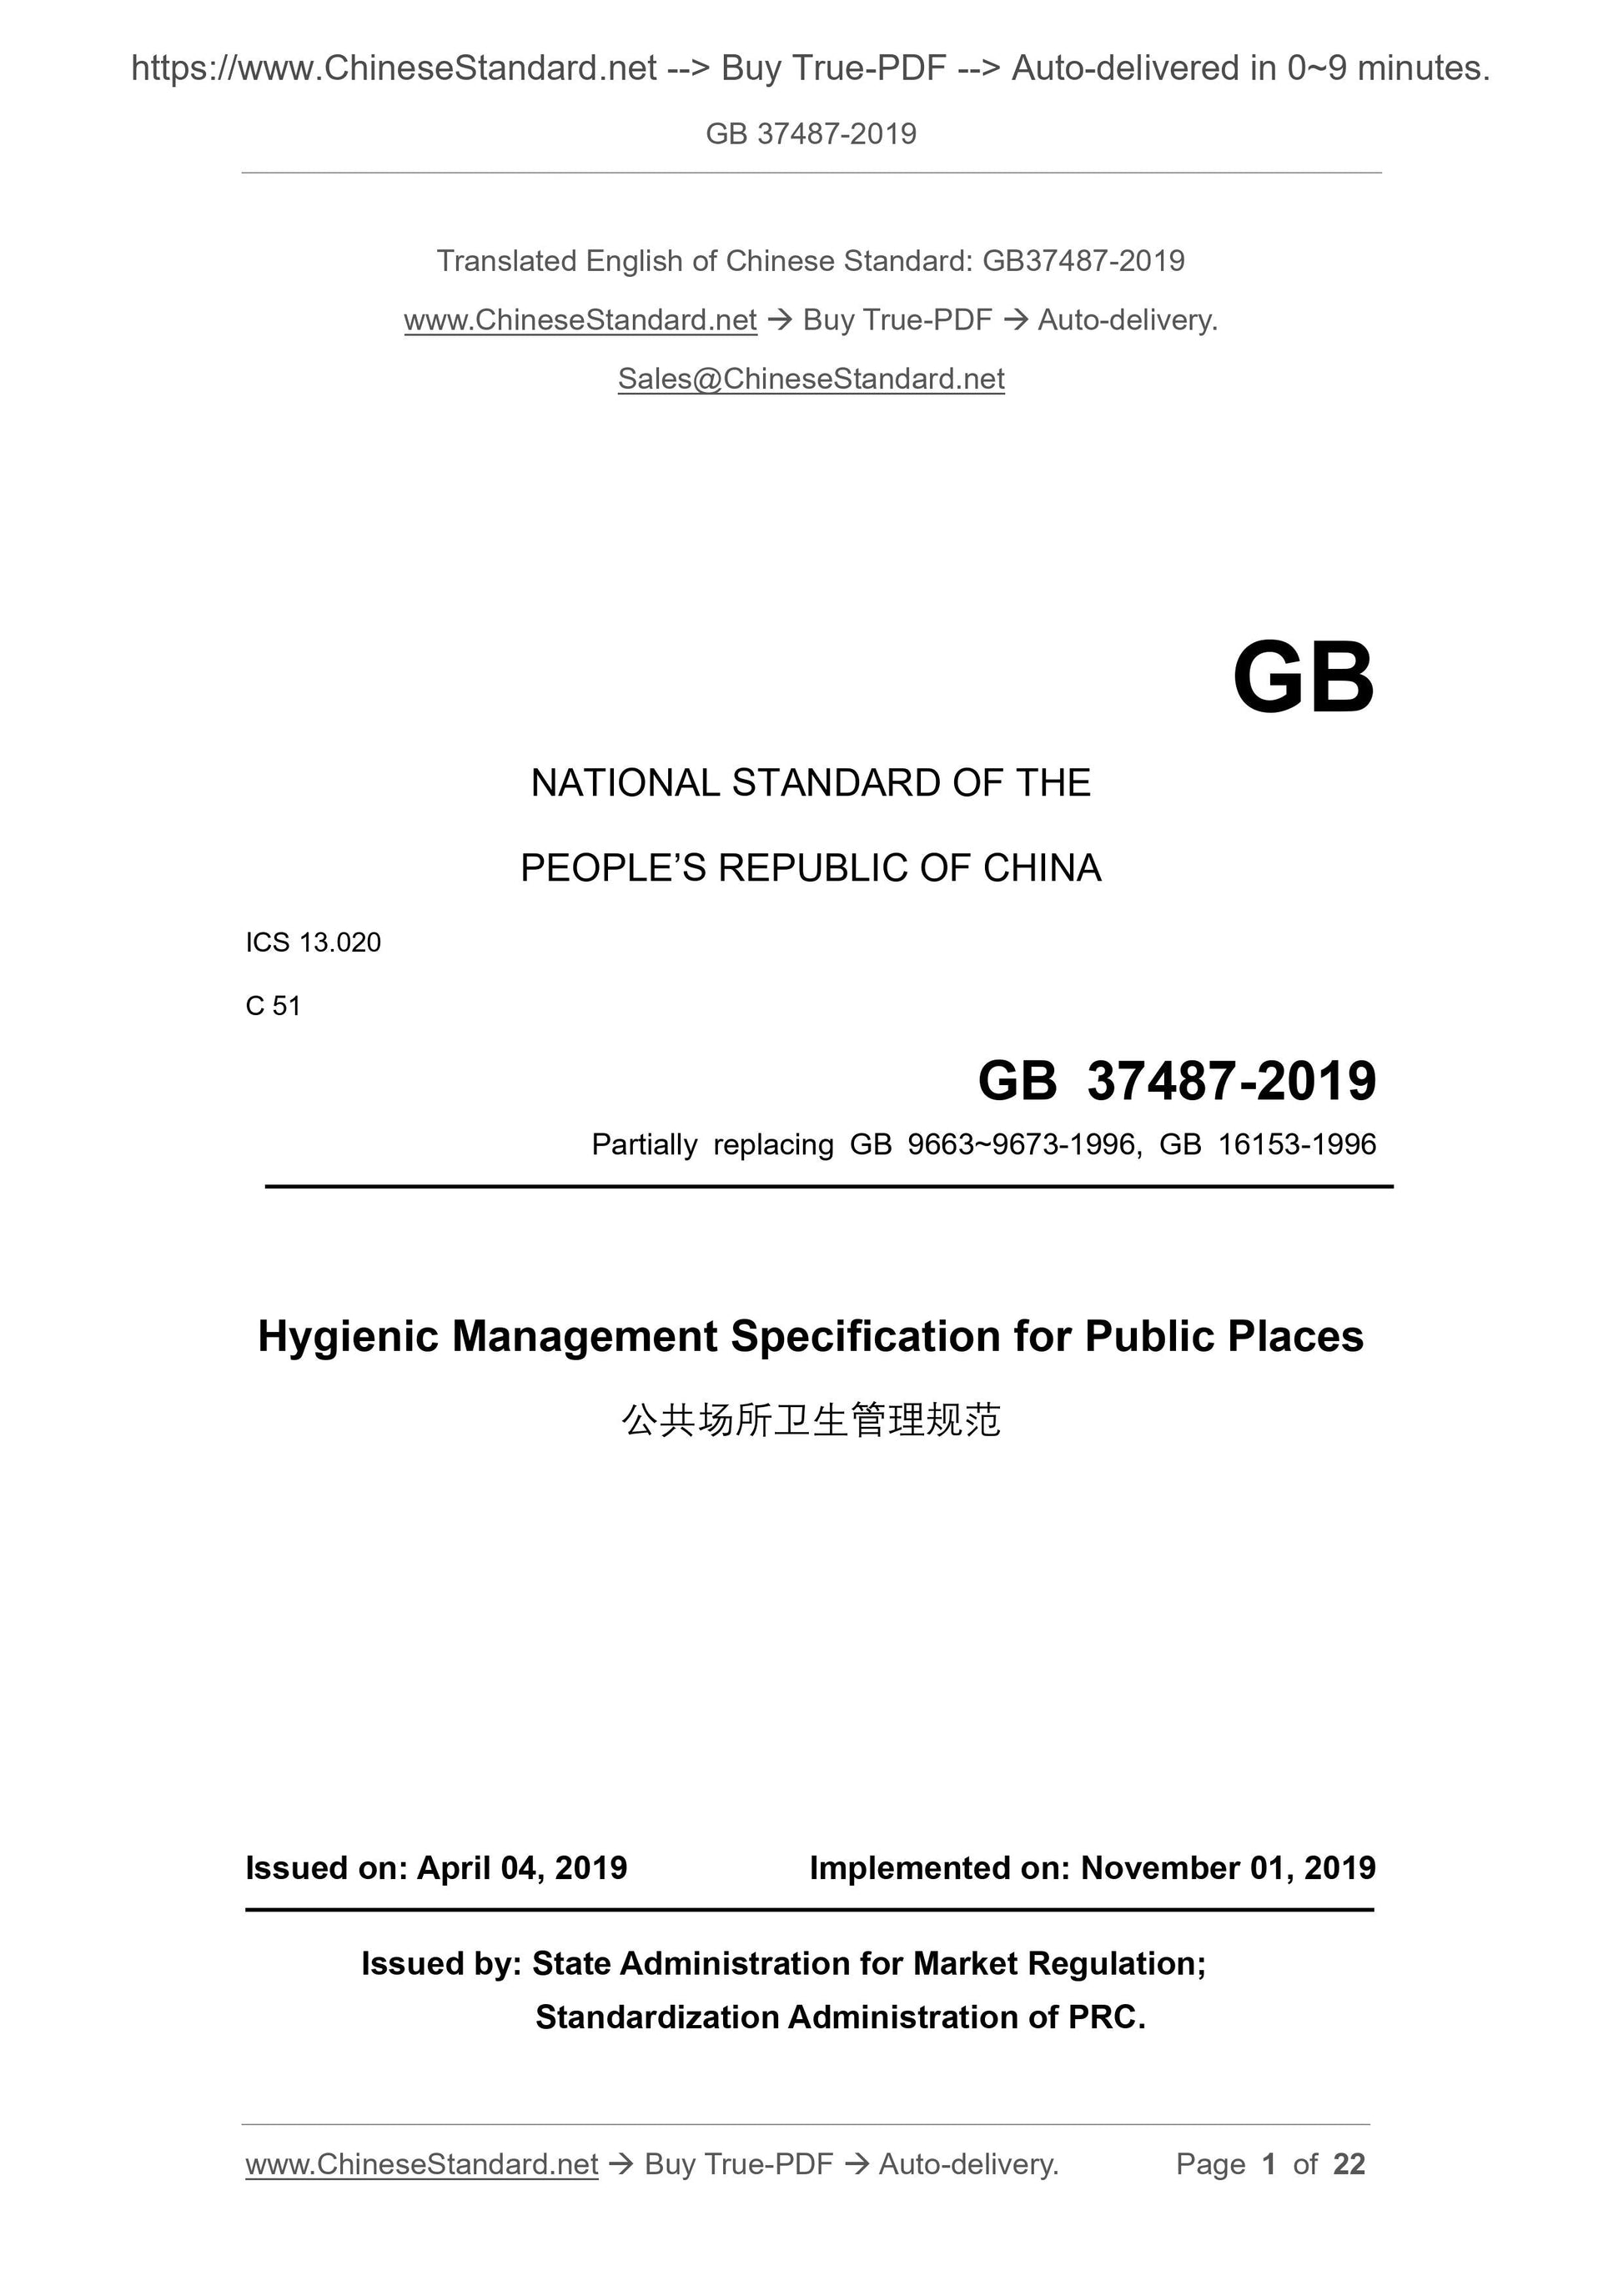 GB 37487-2019 Page 1